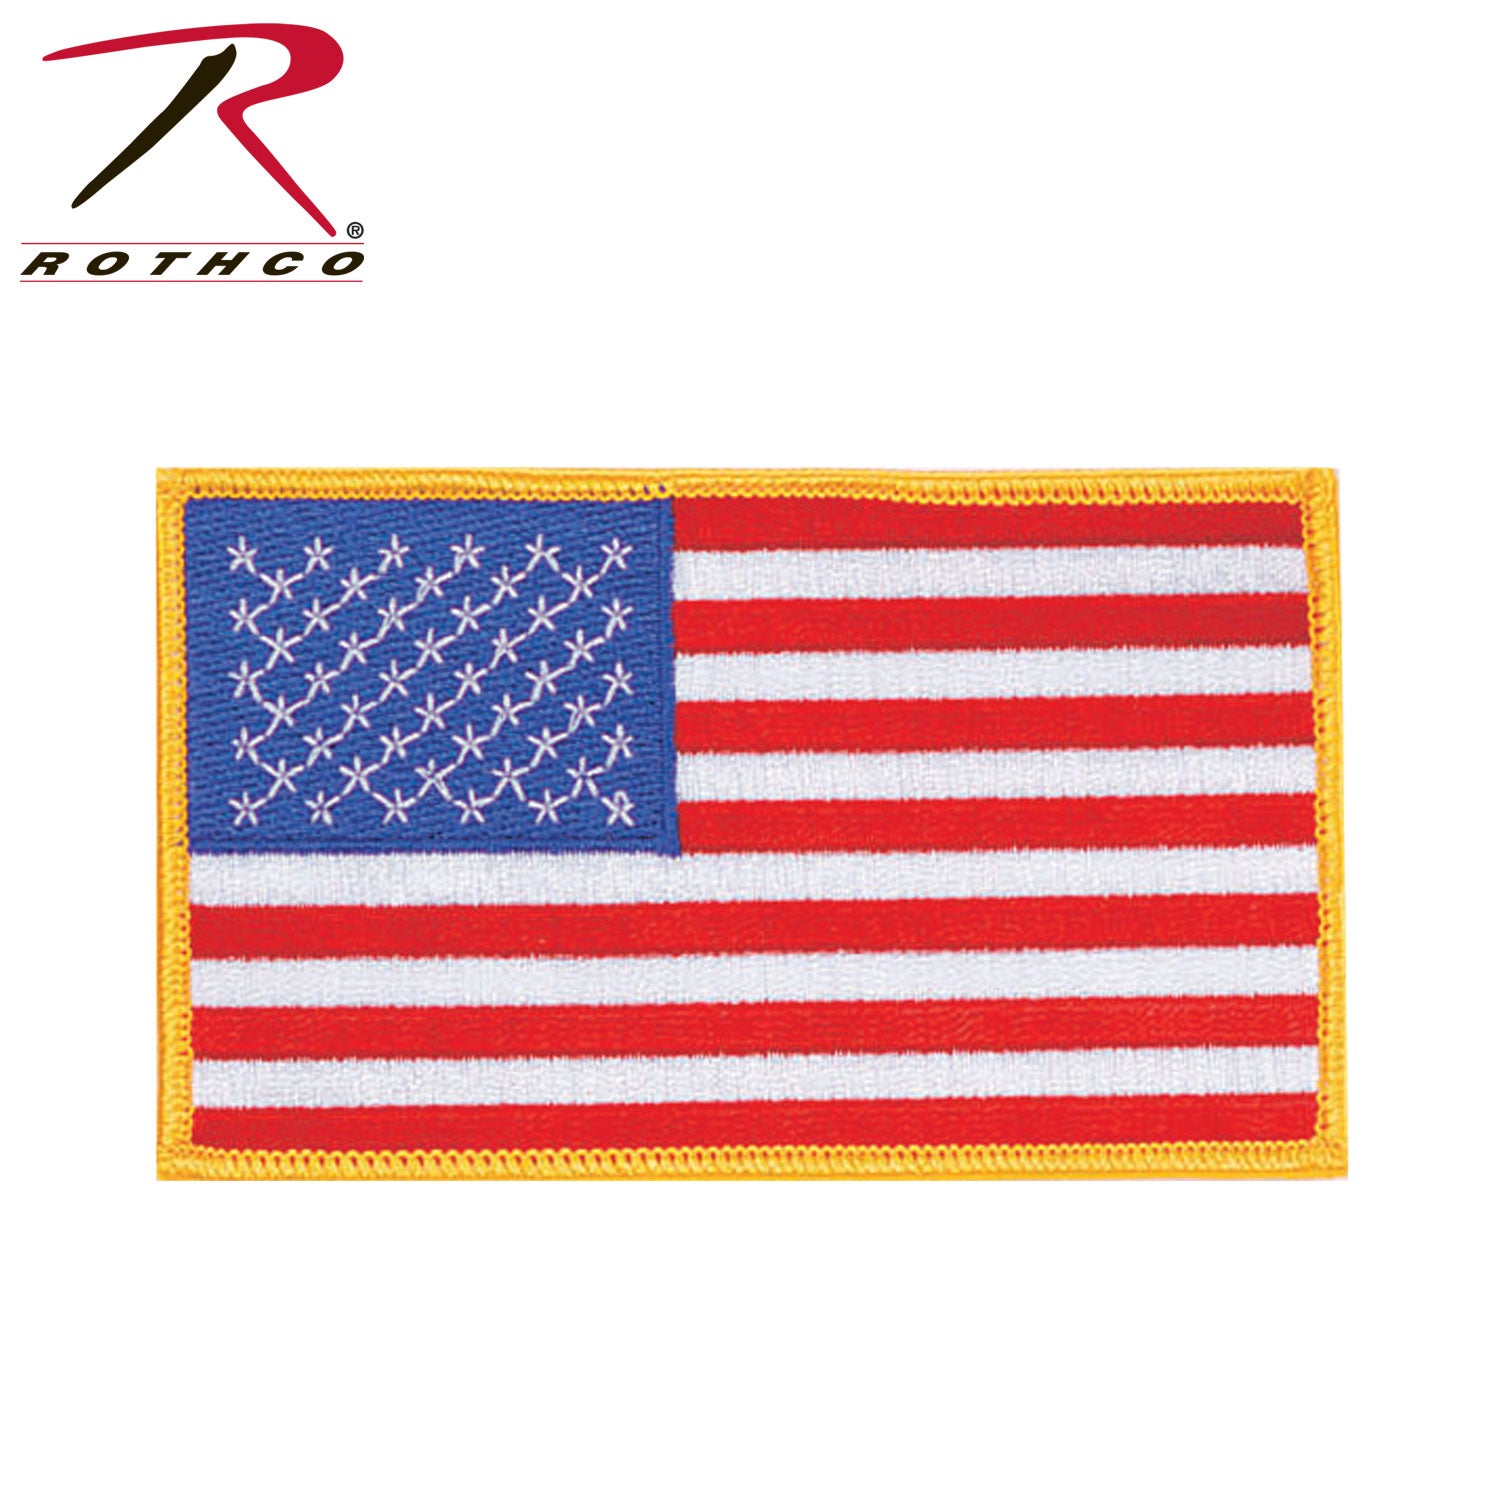 Rothco OCP American Flag Patch with Hook Back